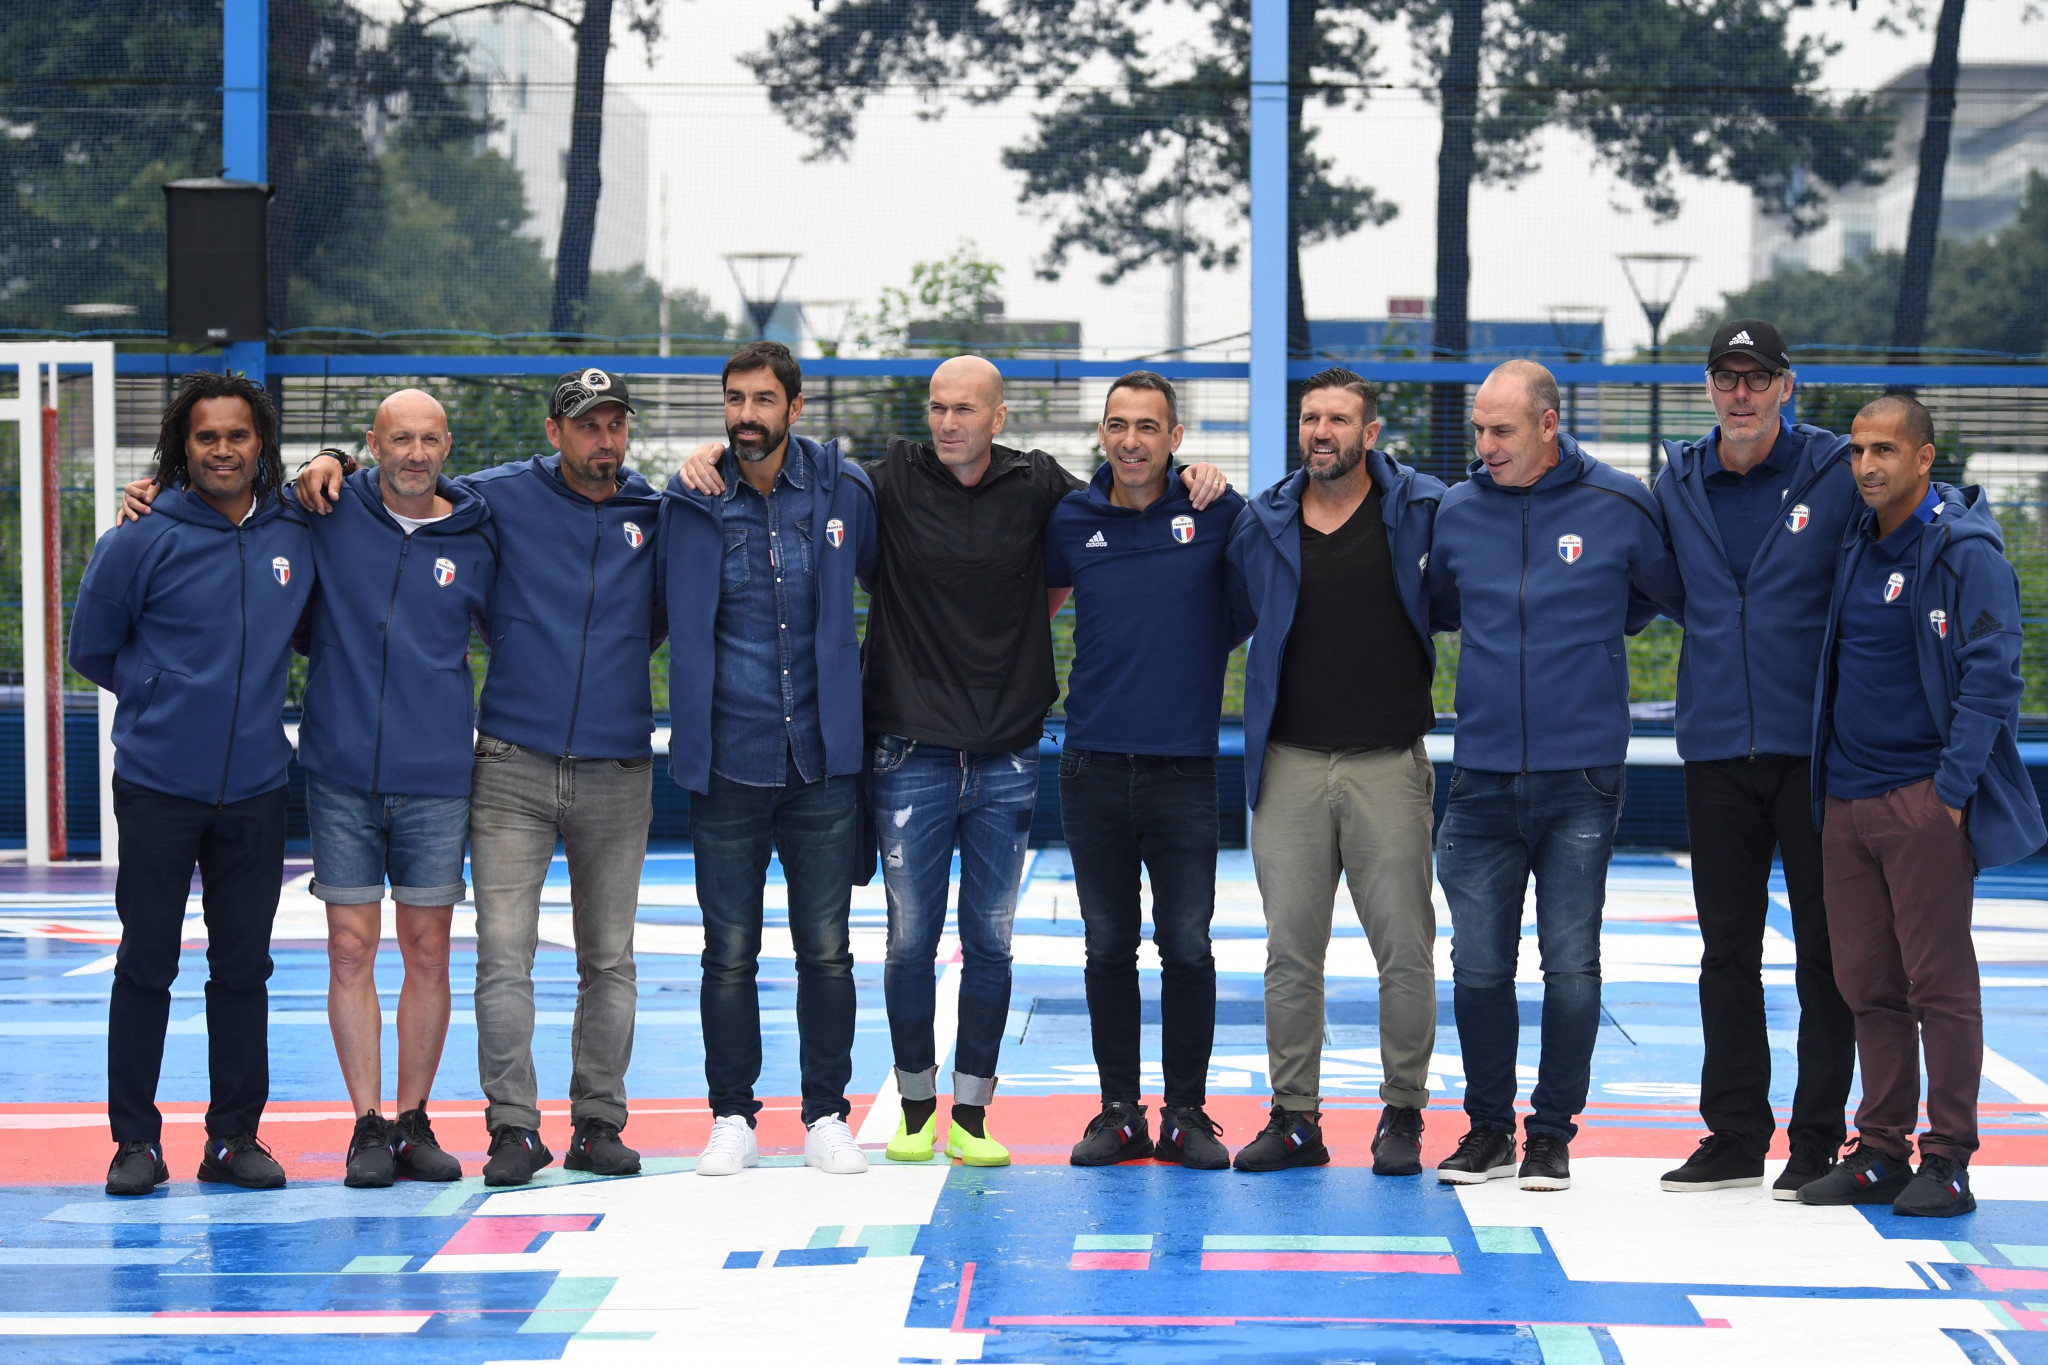 Members of France's 1998 FIFA World Cup-winning squad pictured at an event in 2018 to mark the 20th anniversary of the triumph ©Getty Images